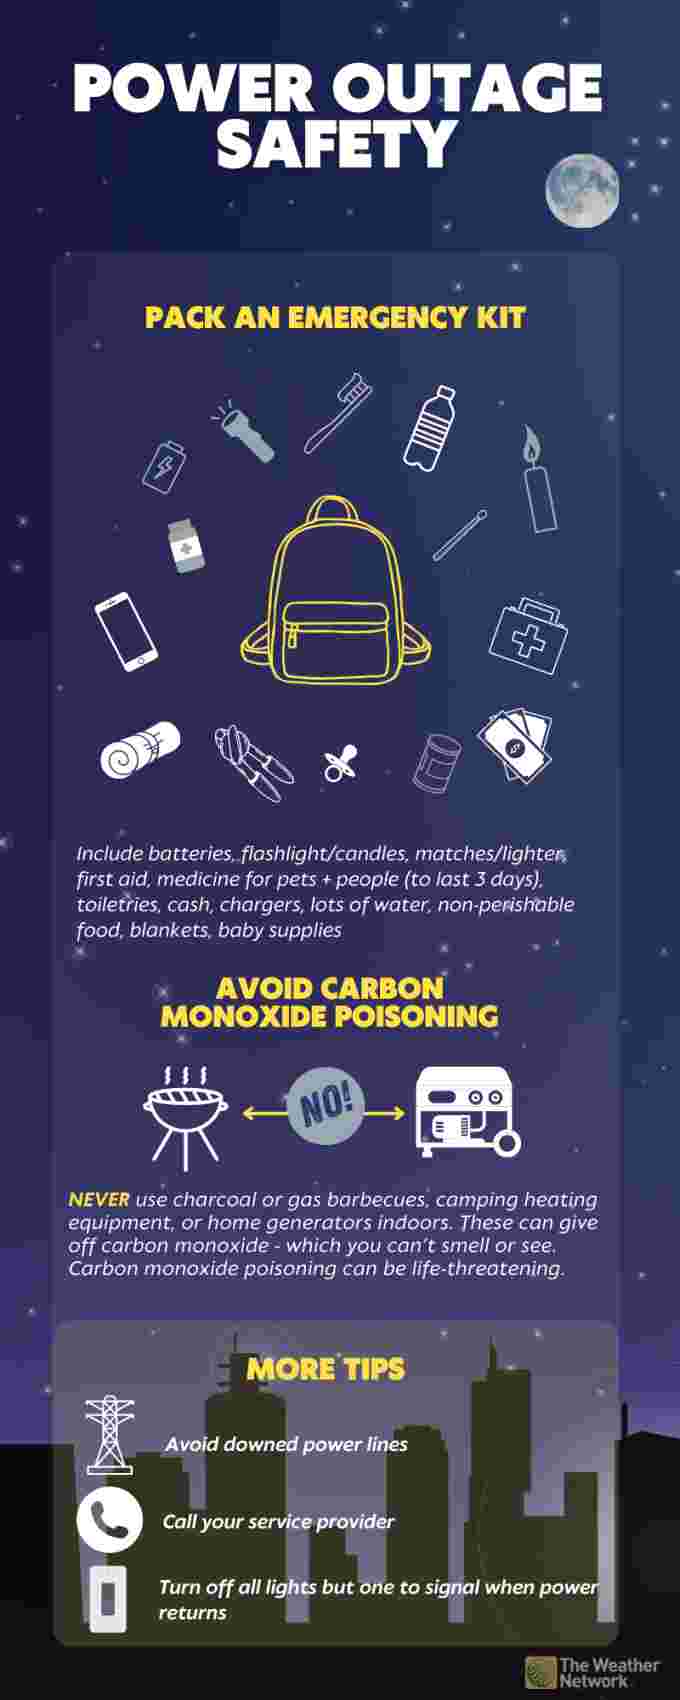 Power outage safety infographic (Cheryl Santa-Maria)